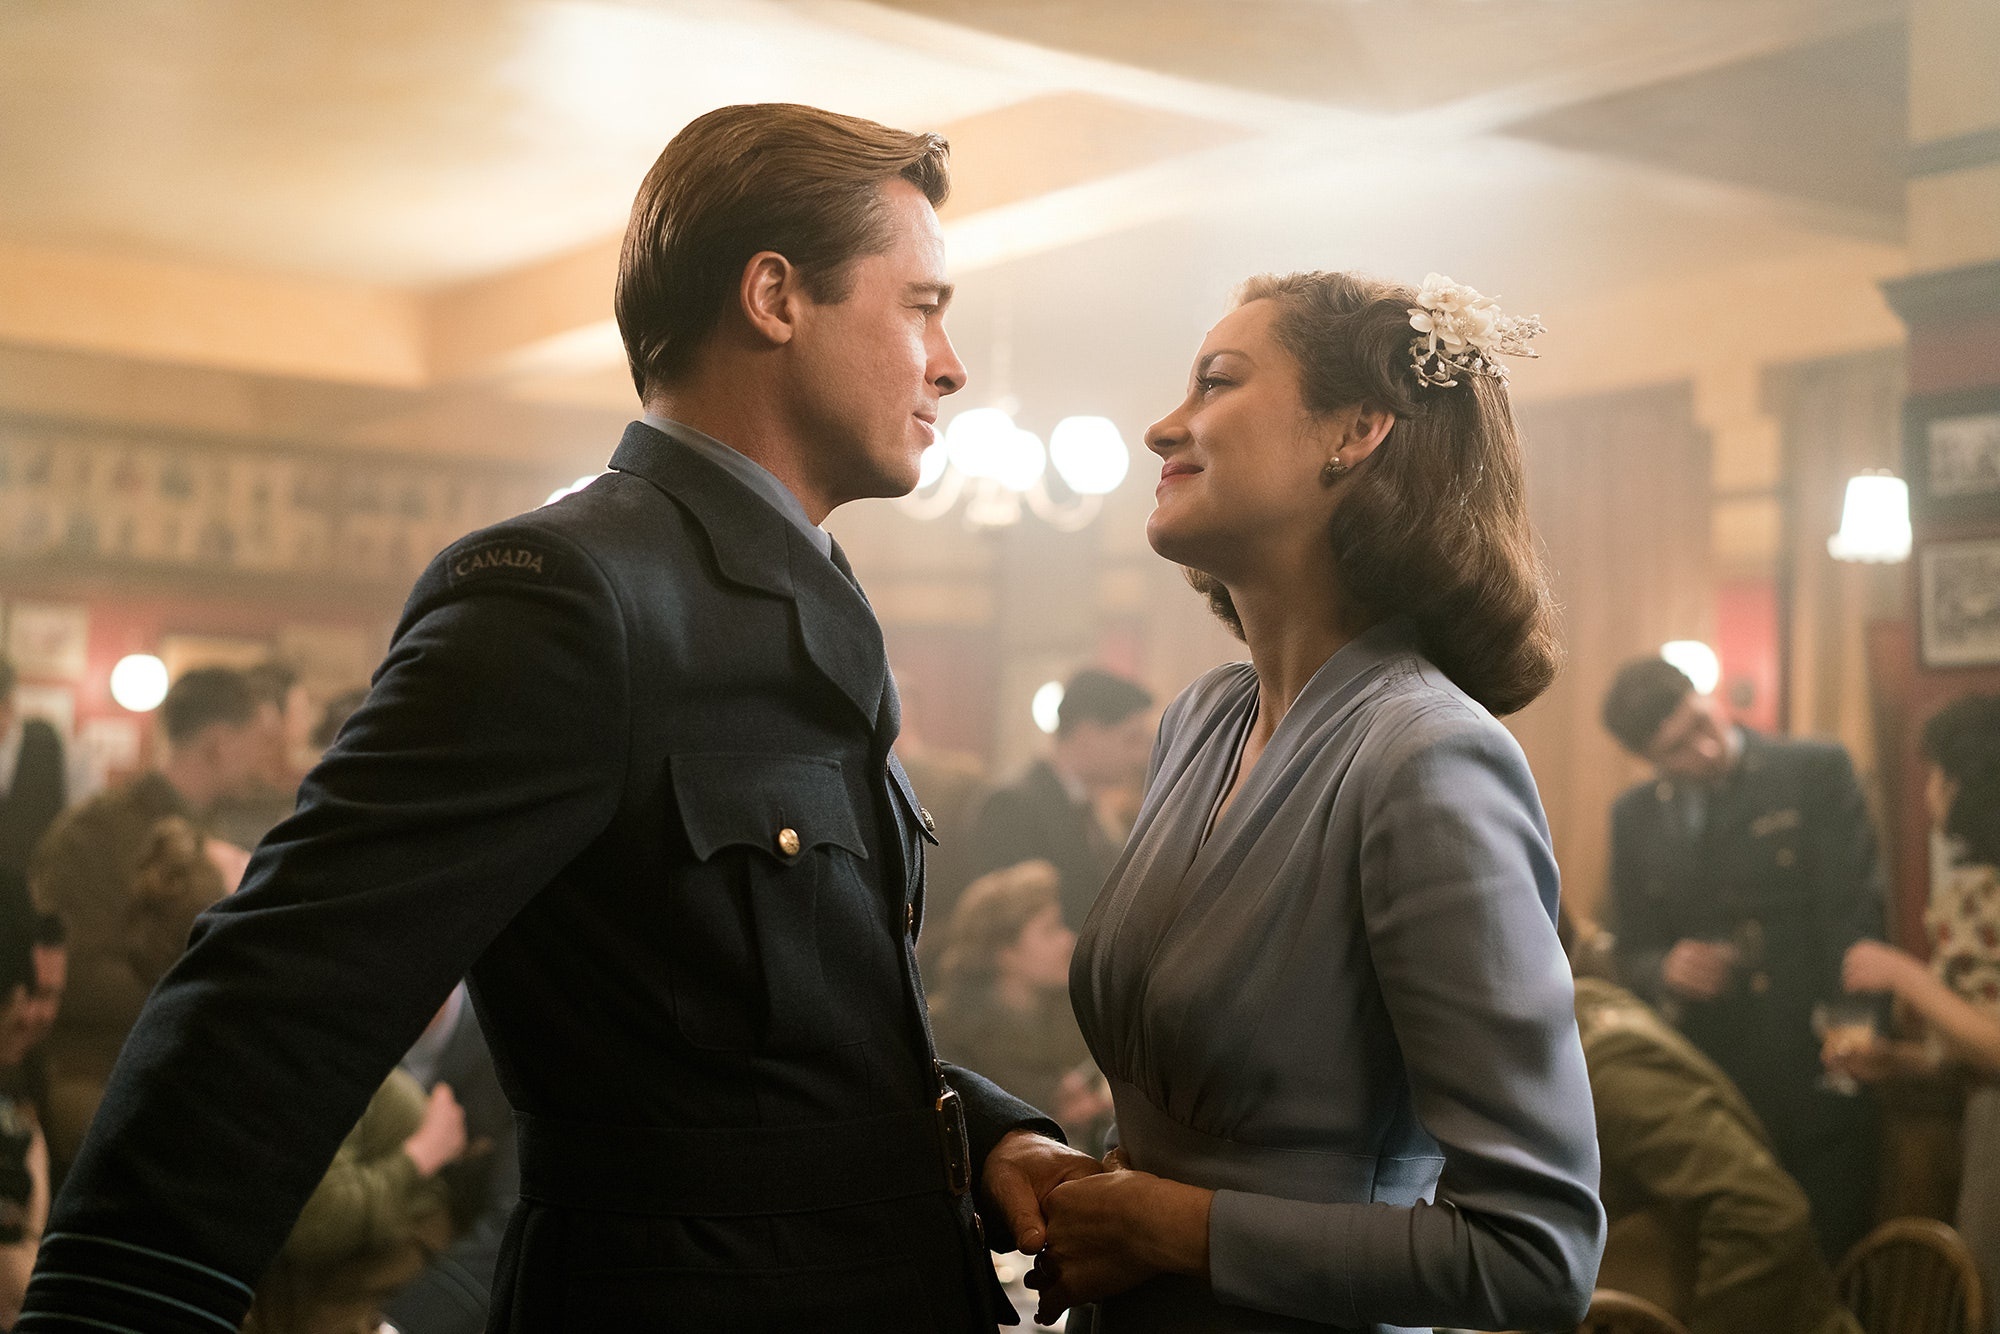 Allied movie review, Nostalgia for American heroes, Empty nostalgia, Peter Travers, 2000x1340 HD Desktop